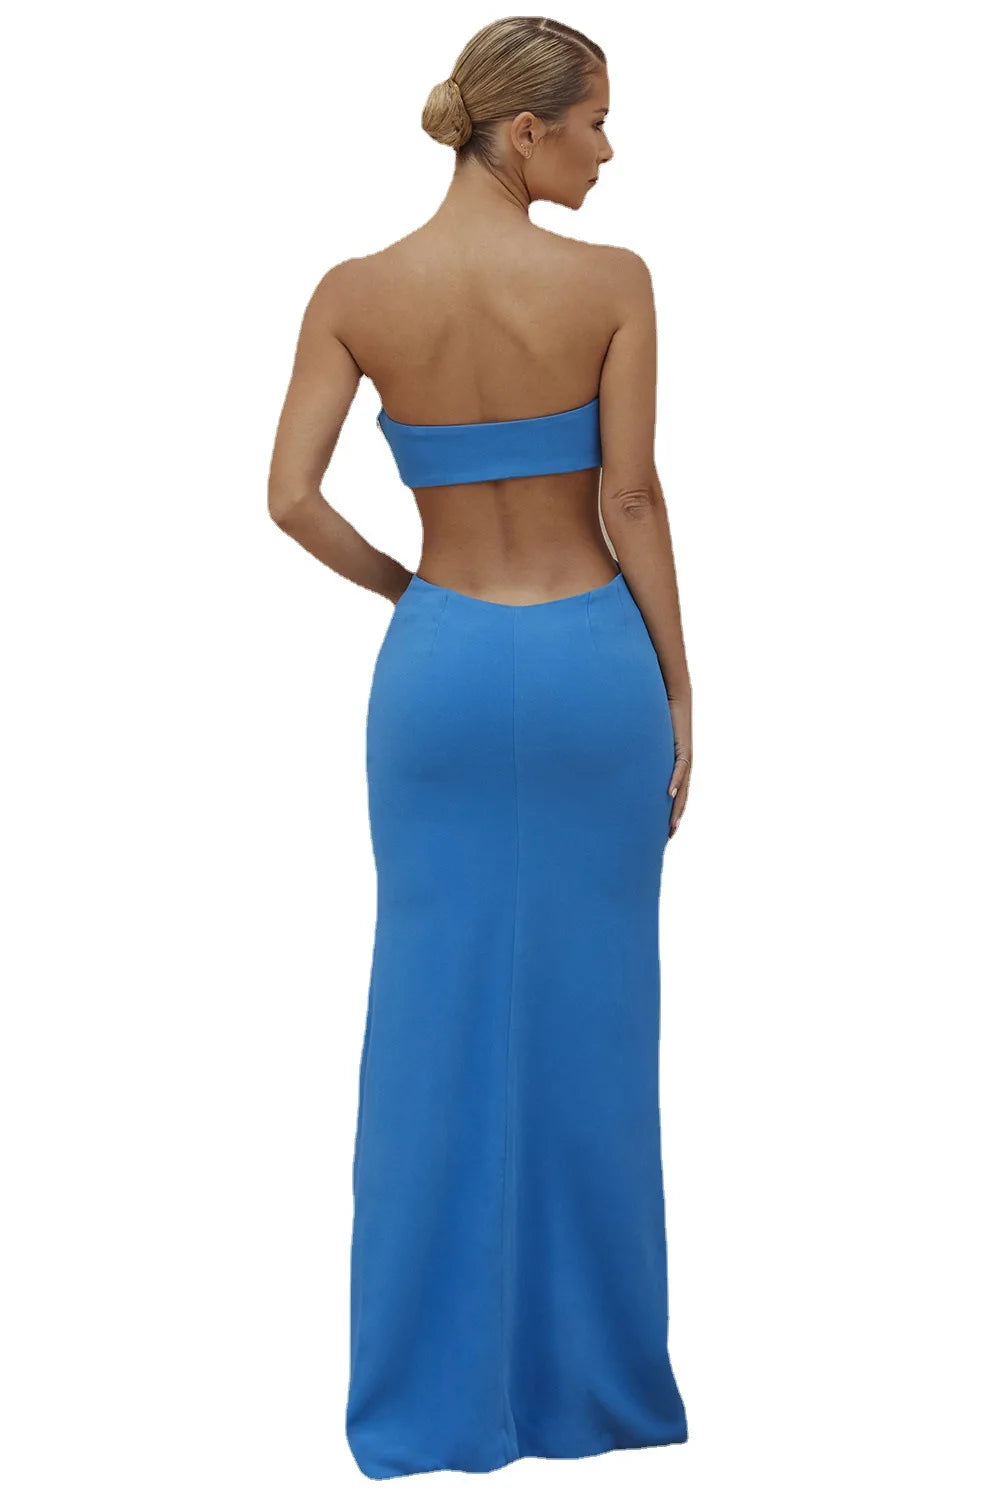 Bodycon Blue Cut Out Strapless Off The Shoulder Bandage Maxi Long Dress Women Elegant Sleeveless Backless Evening Party Dresses